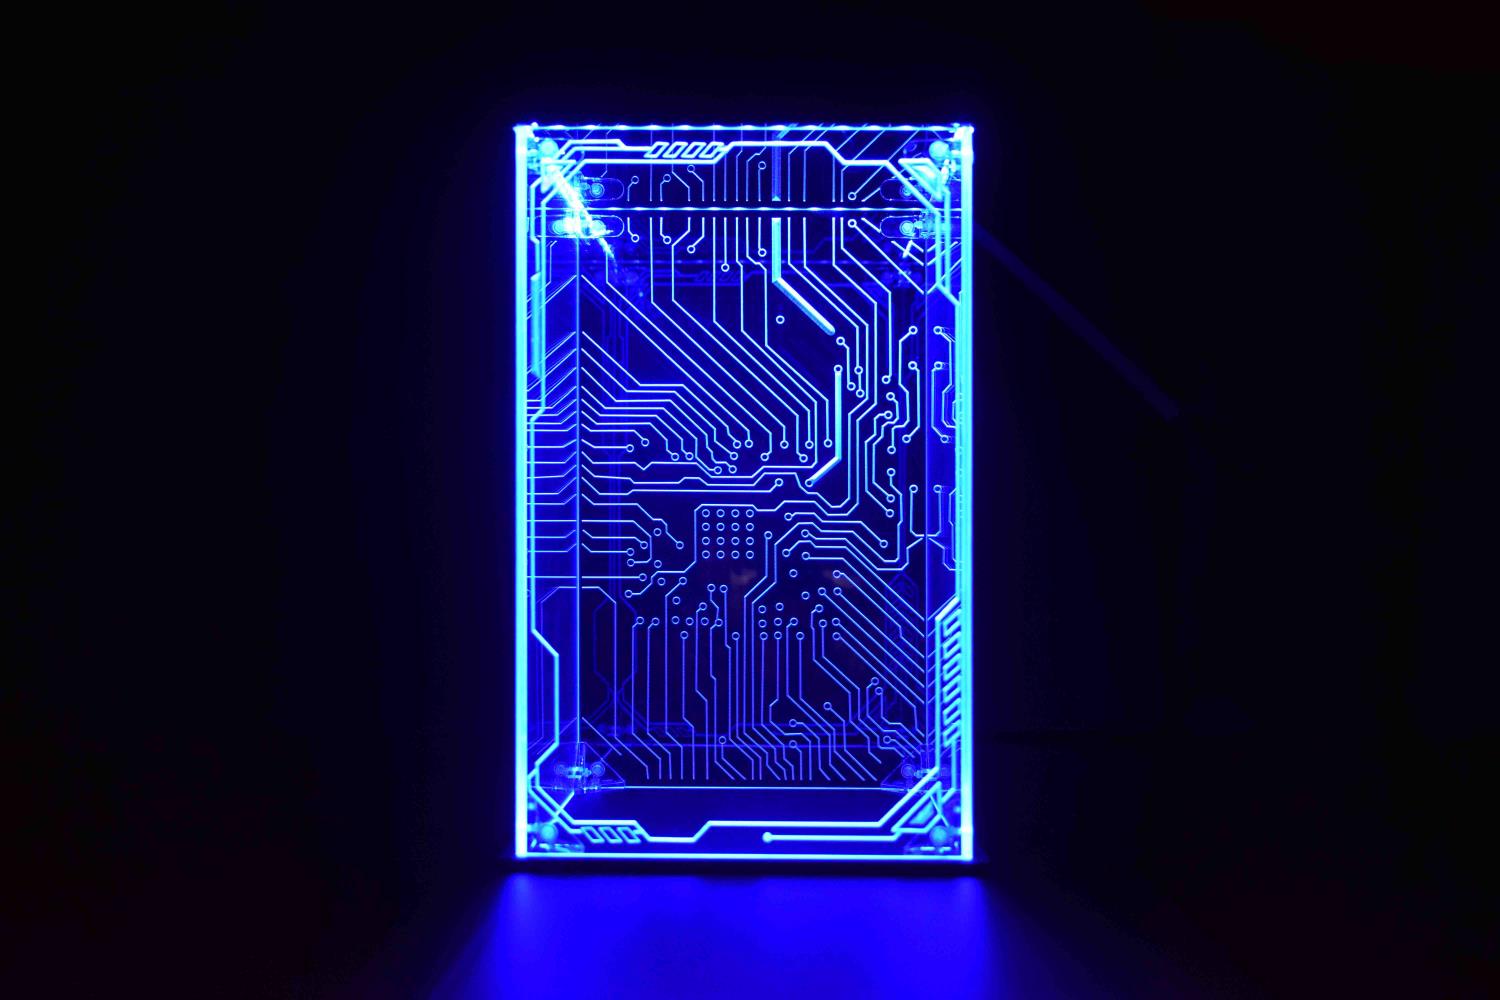 Dragon Ball Z LED Display Case For Anime Action Figure